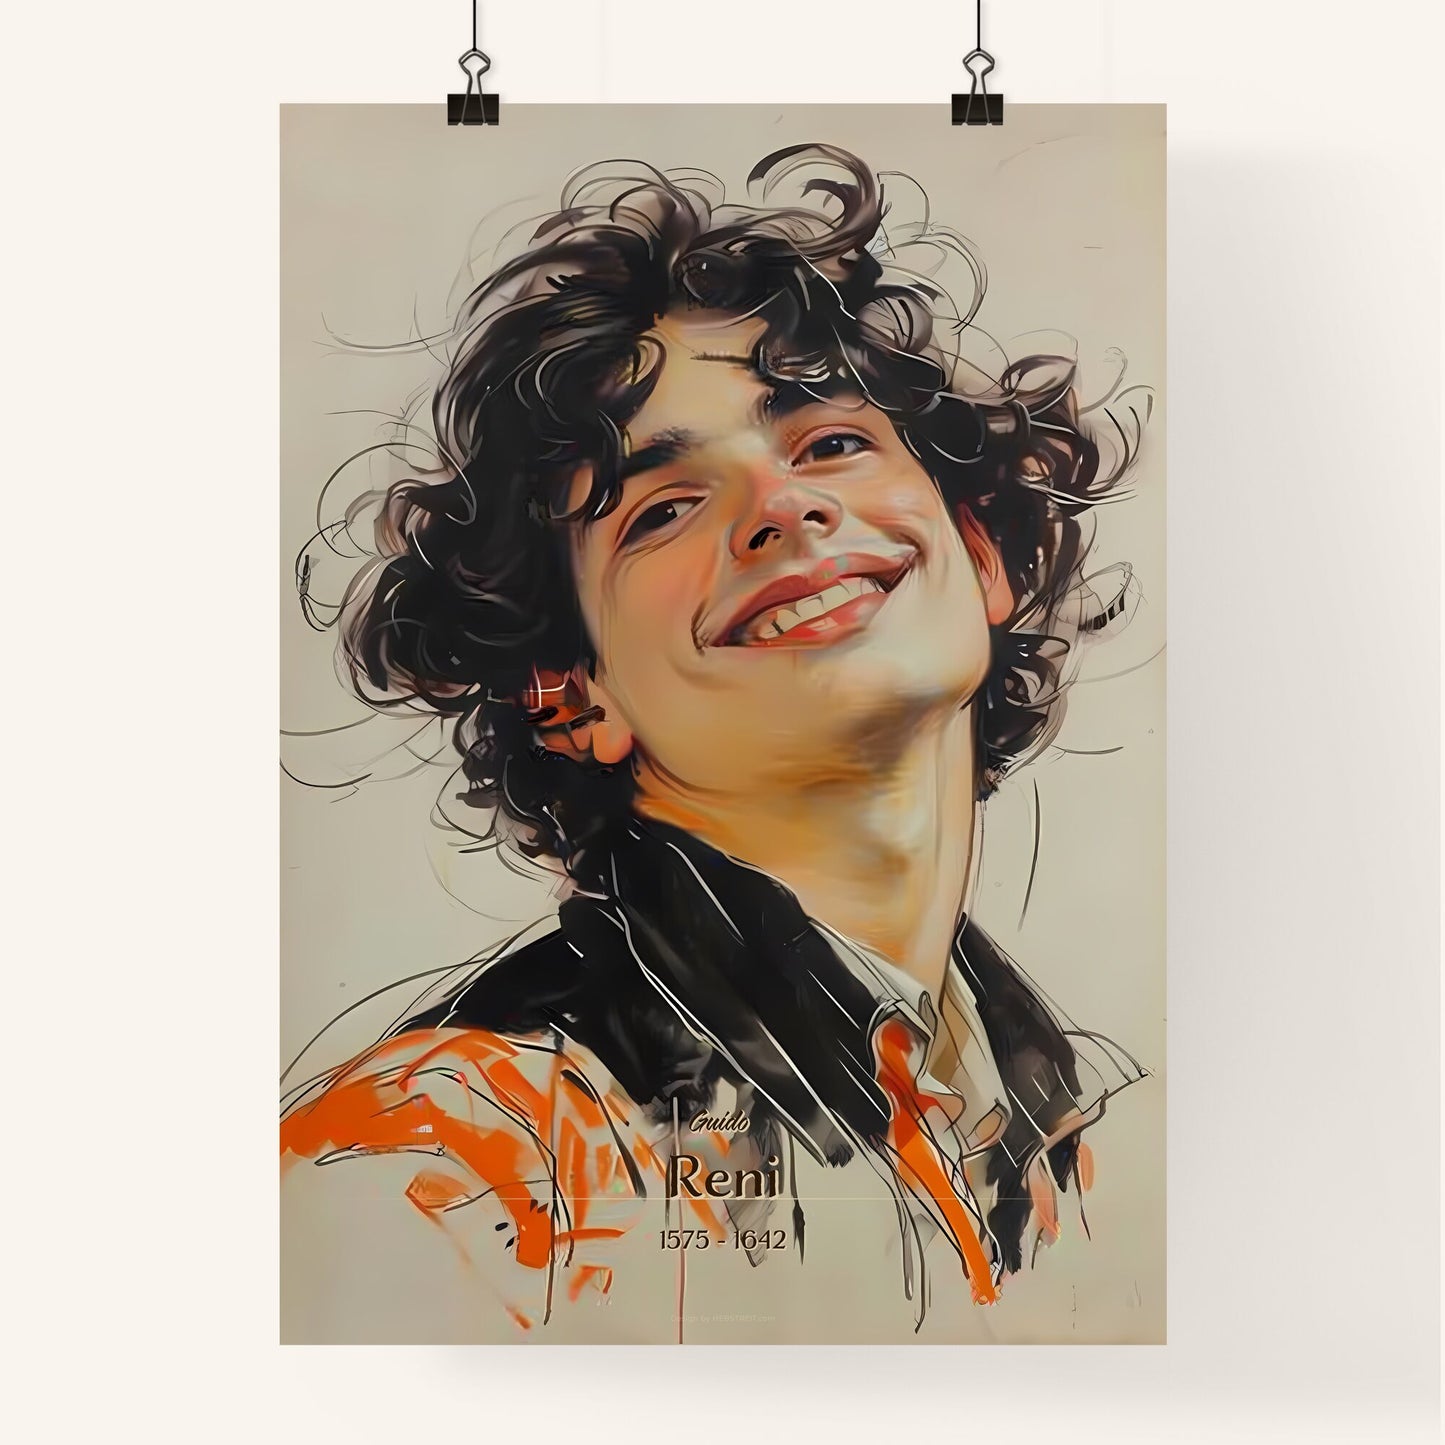 Guido, Reni, 1575 - 1642, A Poster of a man with curly hair smiling Default Title